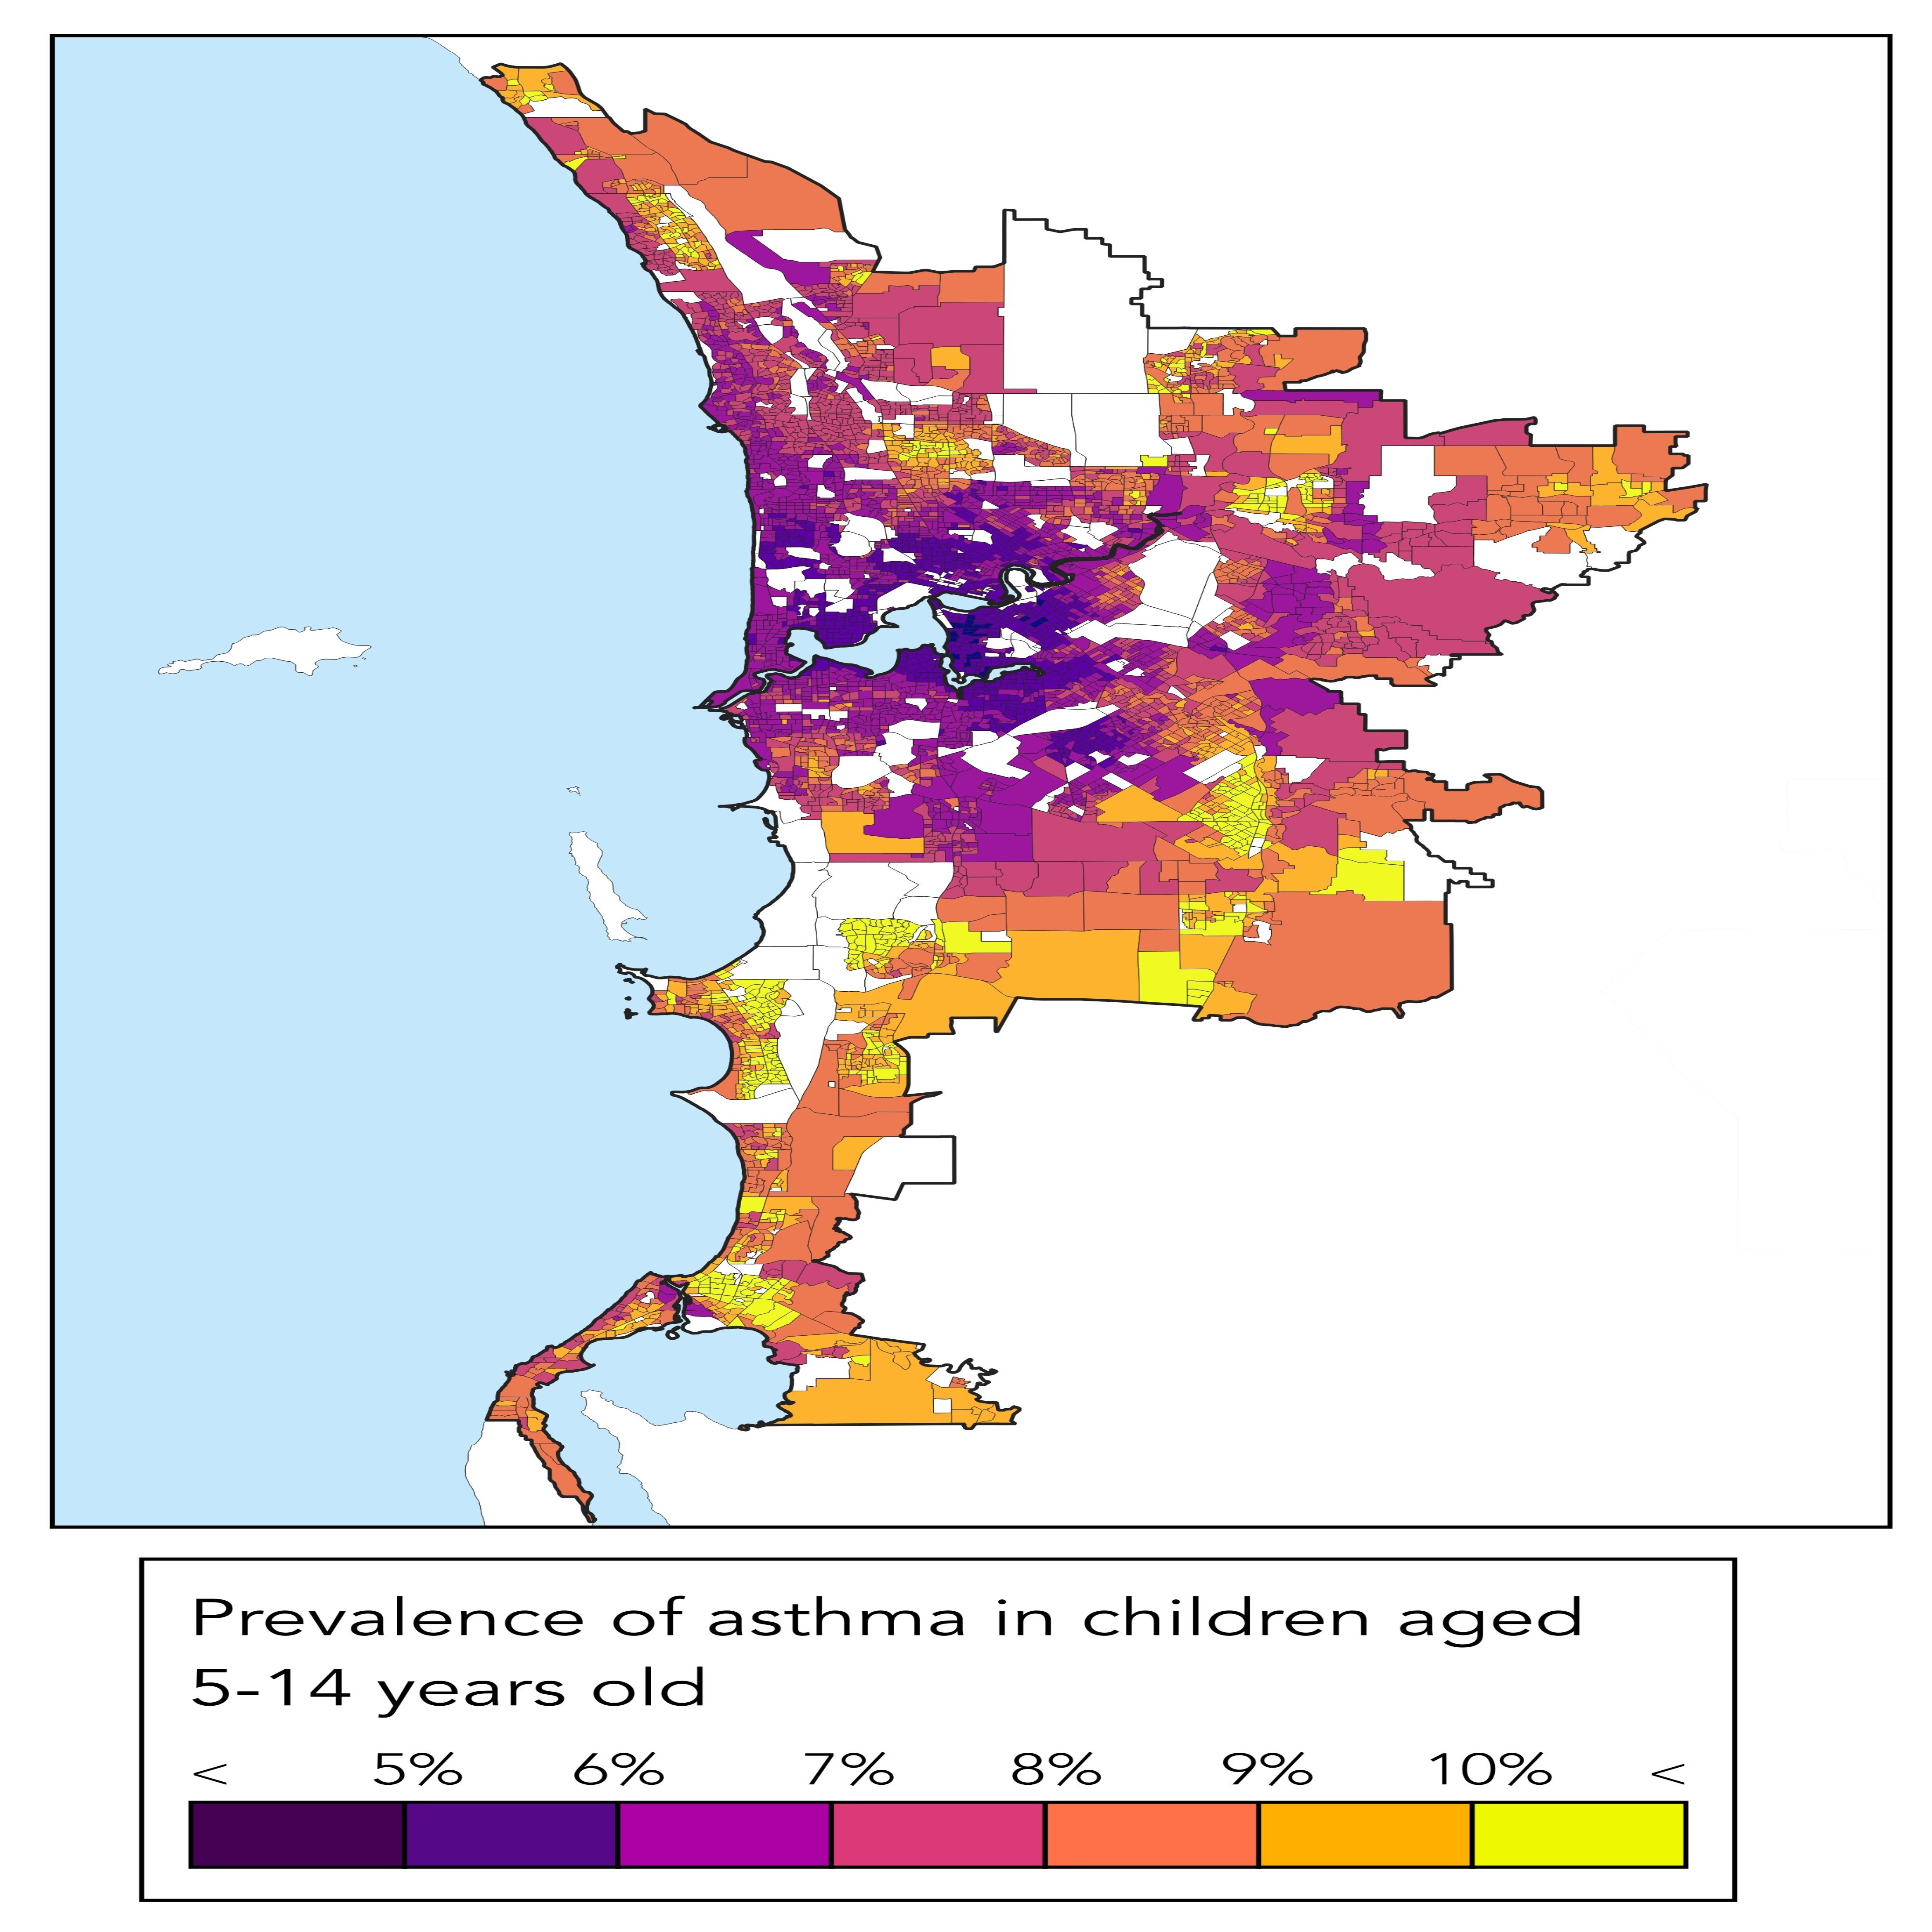 Asthma risk map of perth showing lighter colours indicating more asthma in outer suburbs 